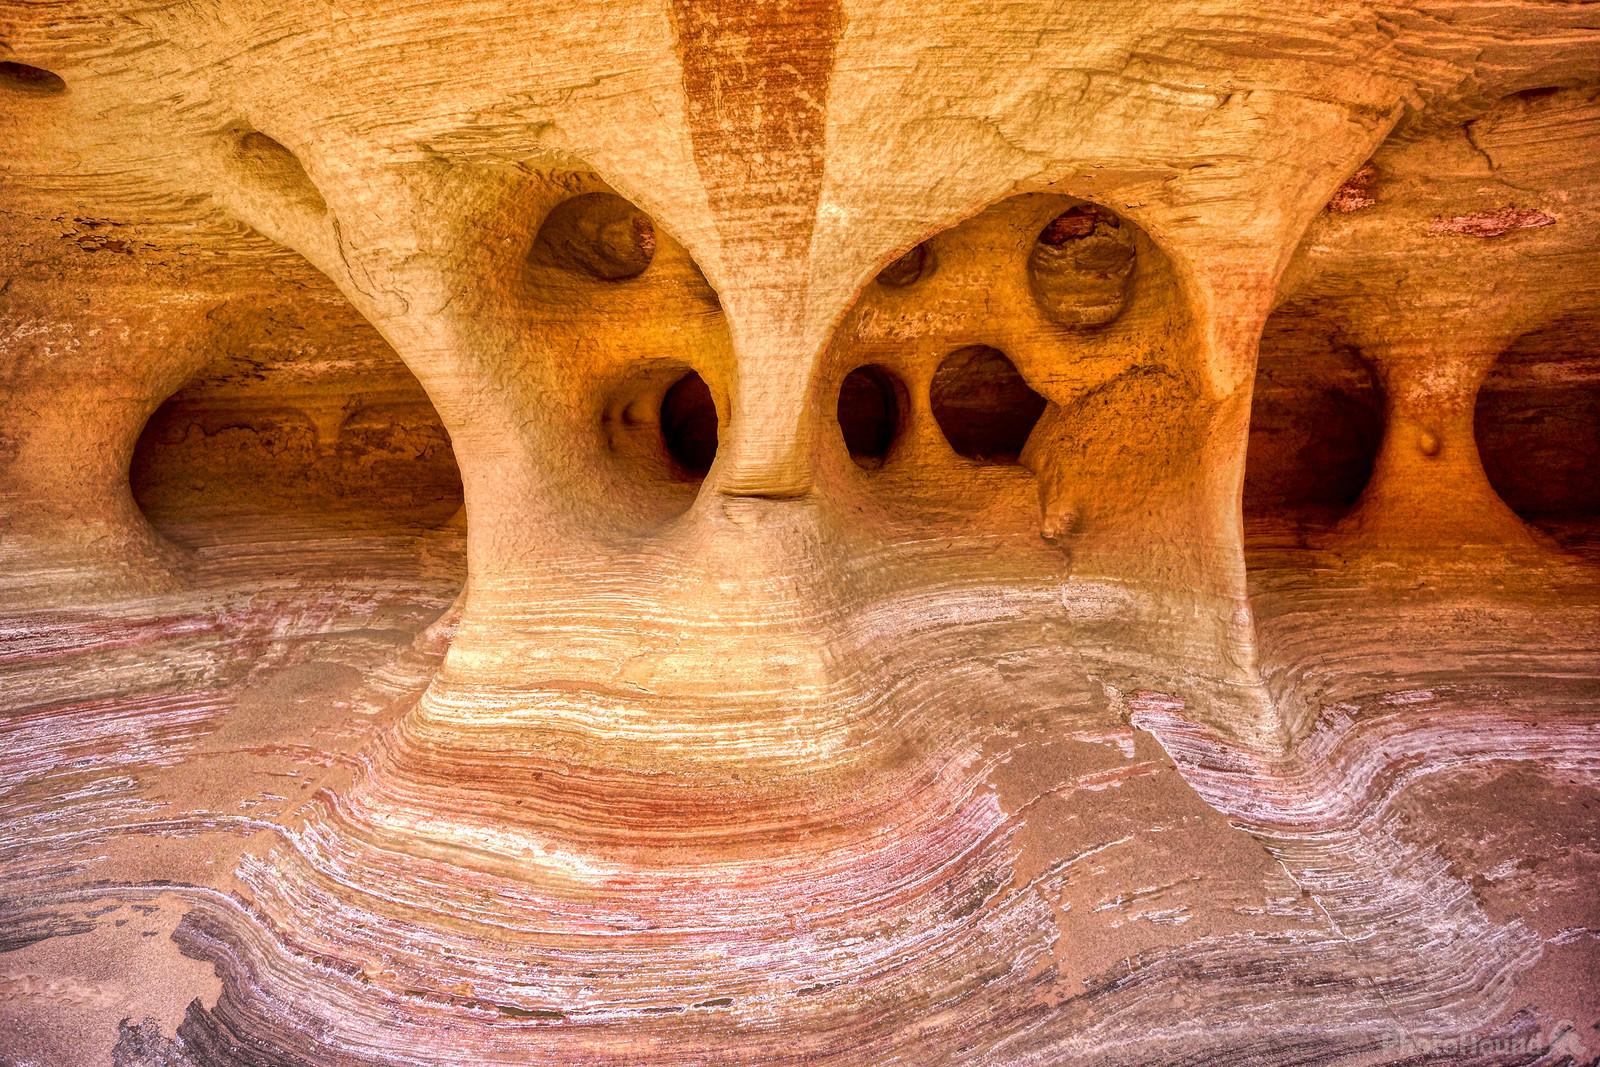 Image of Paria Canyon/Buckskin Gulch Confluence by Laurent Martres